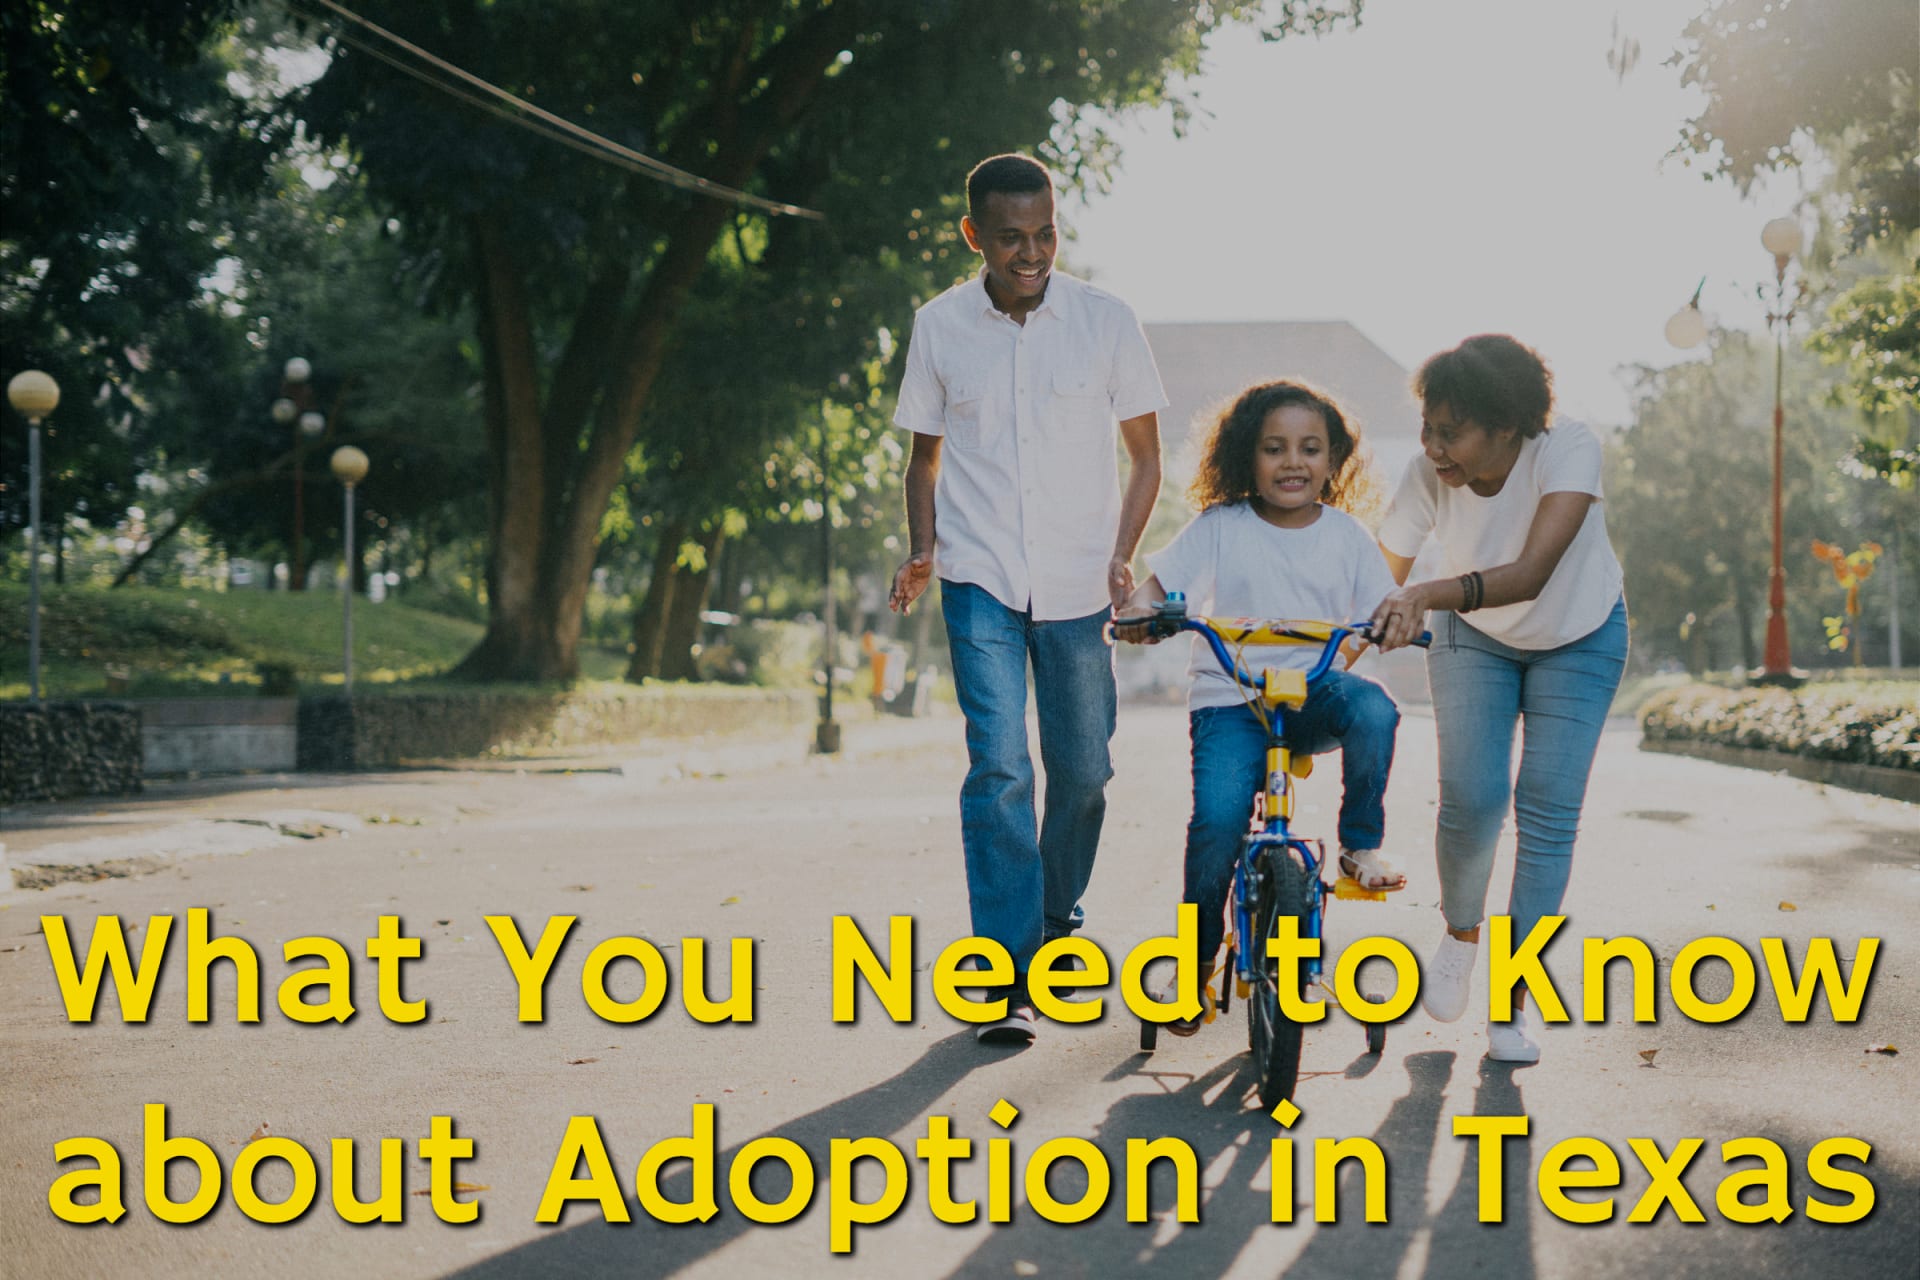 What do I Need to Know about Adoption in Texas?